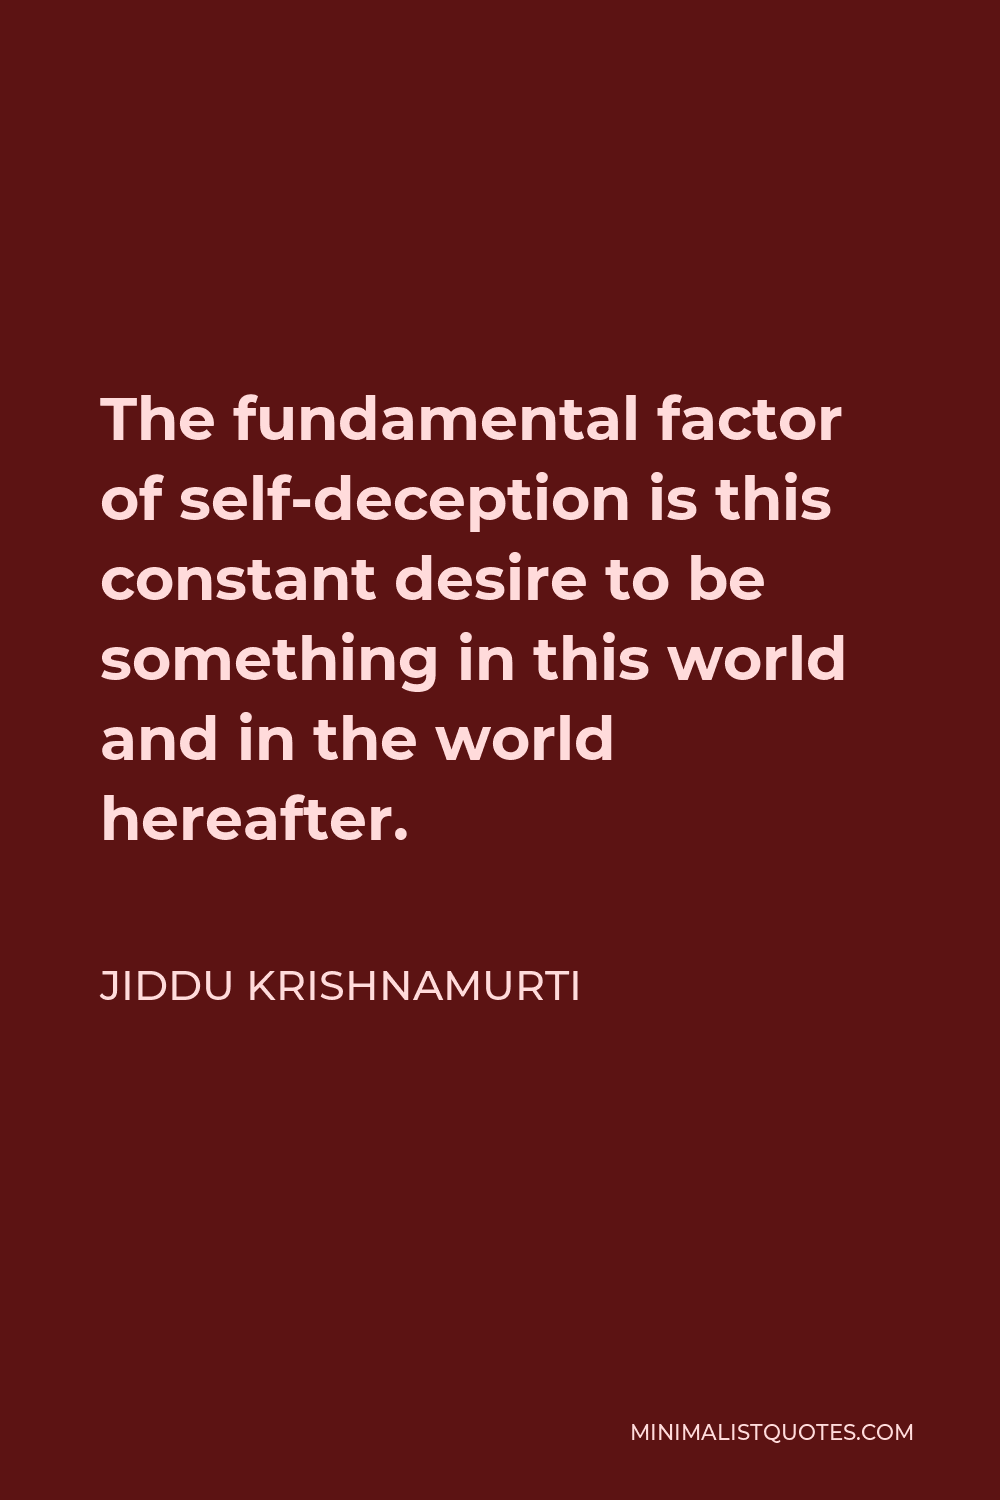 Jiddu Krishnamurti Quote - The fundamental factor of self-deception is this constant desire to be something in this world and in the world hereafter.